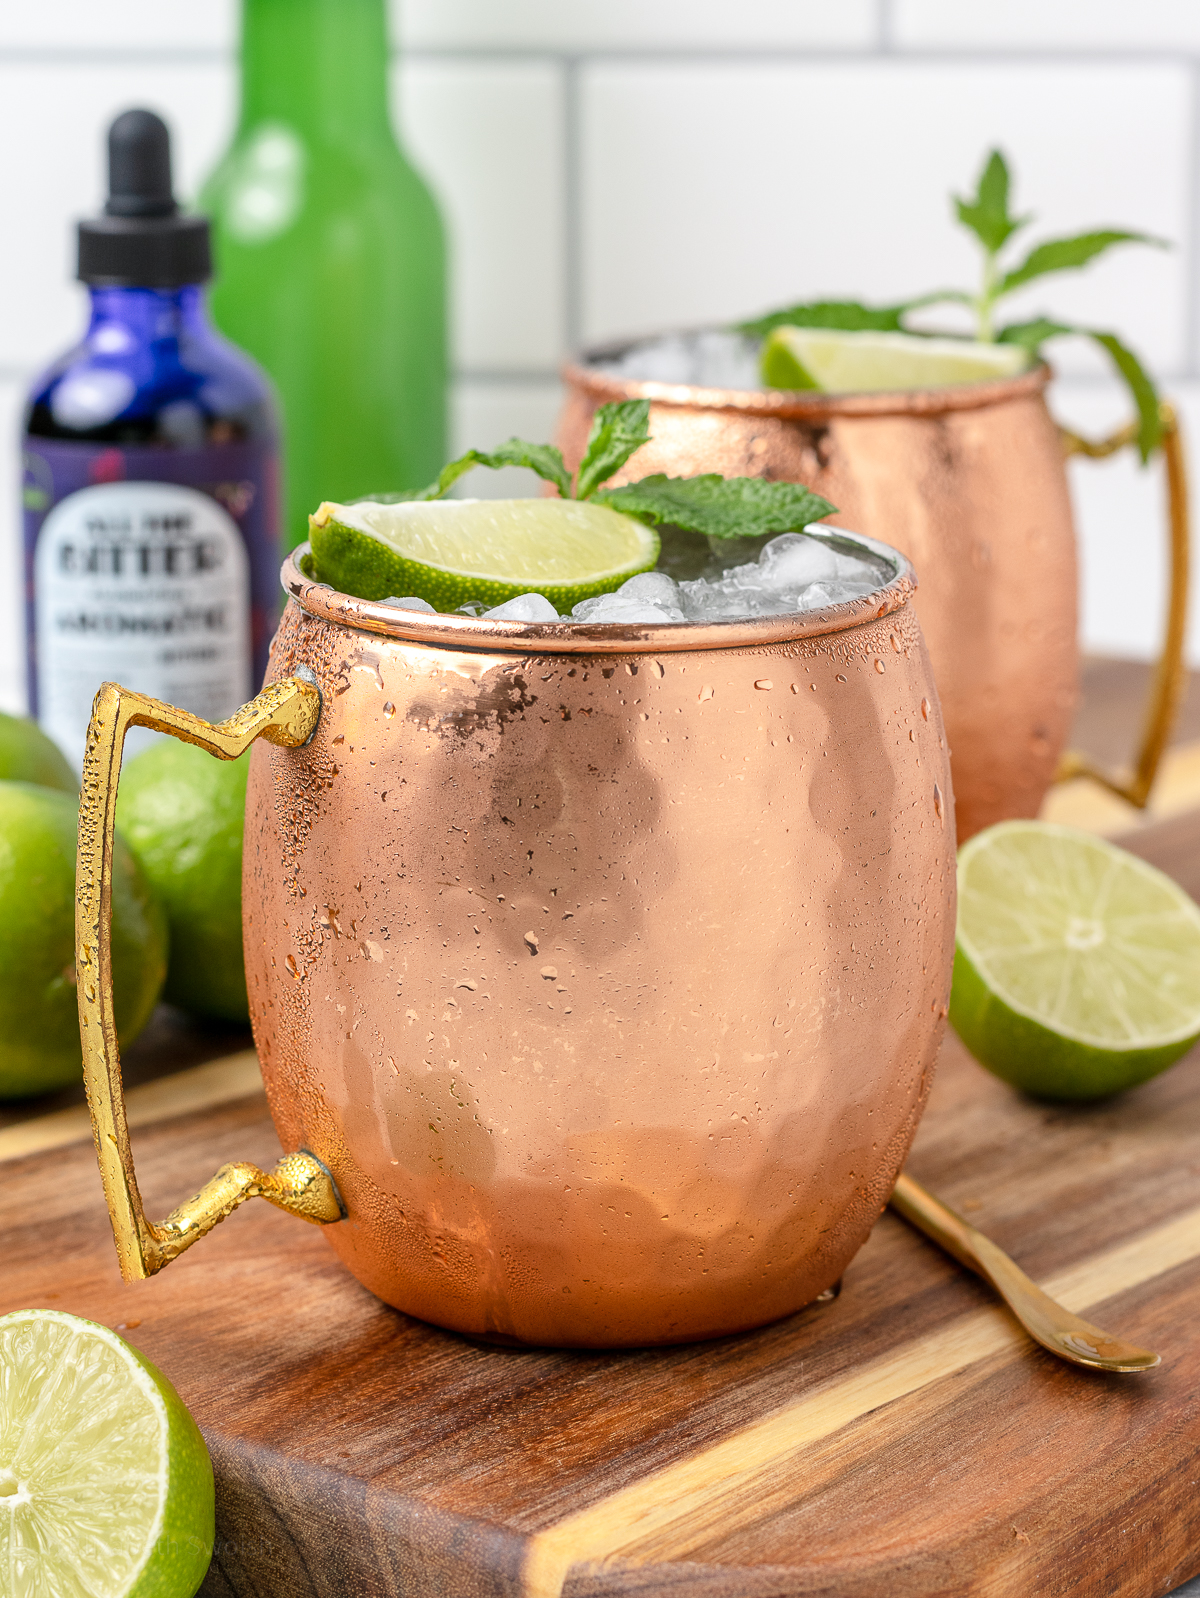 Moscow Mule Mocktails with aromatic bitters and a glass bottle of ginger beer in the background.